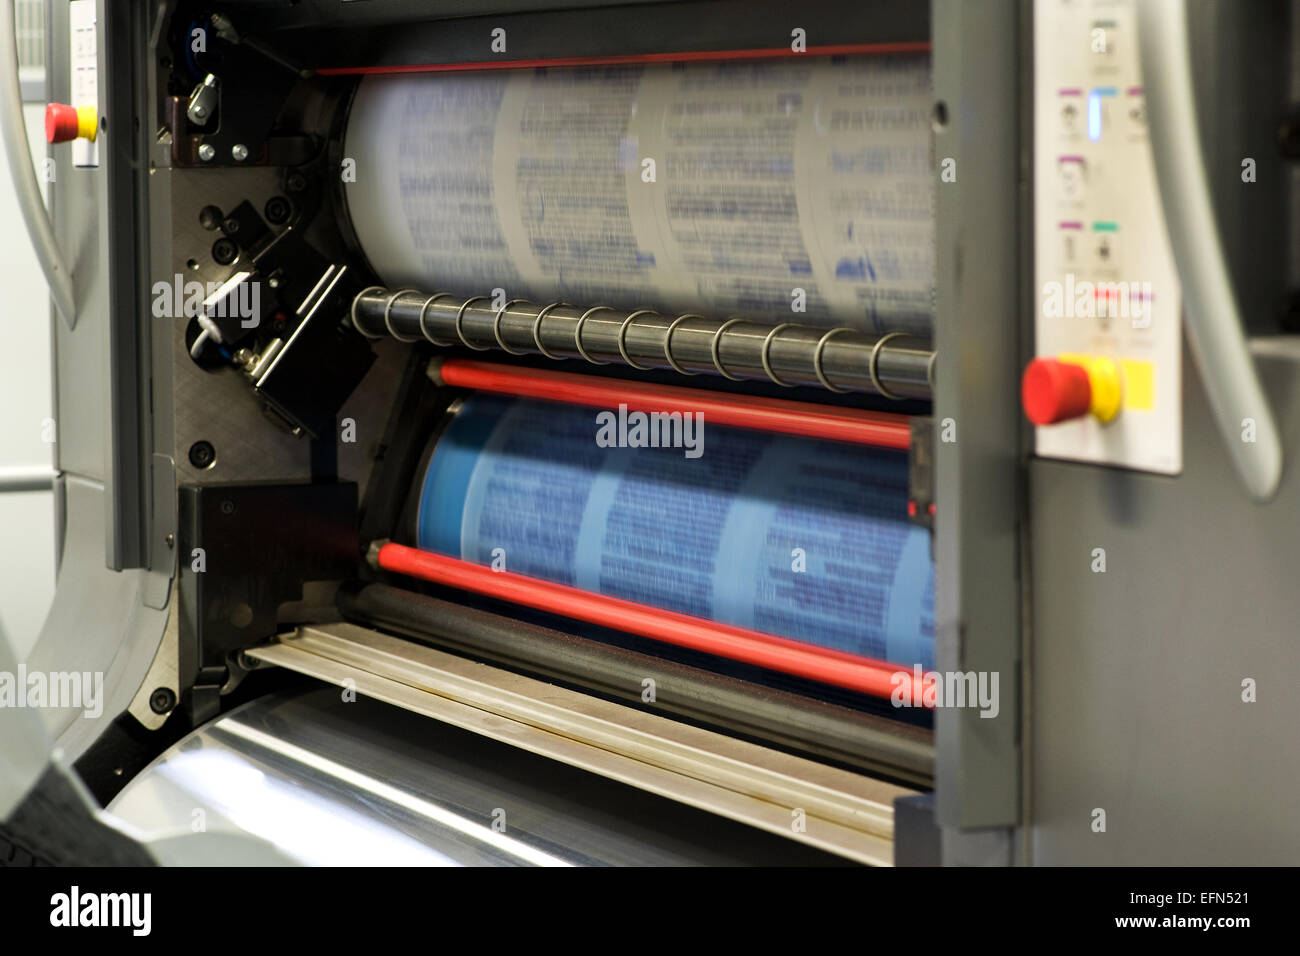 Printing Plenty of Documents or Papers Using Rotary Printing Press Machine. Stock Photo